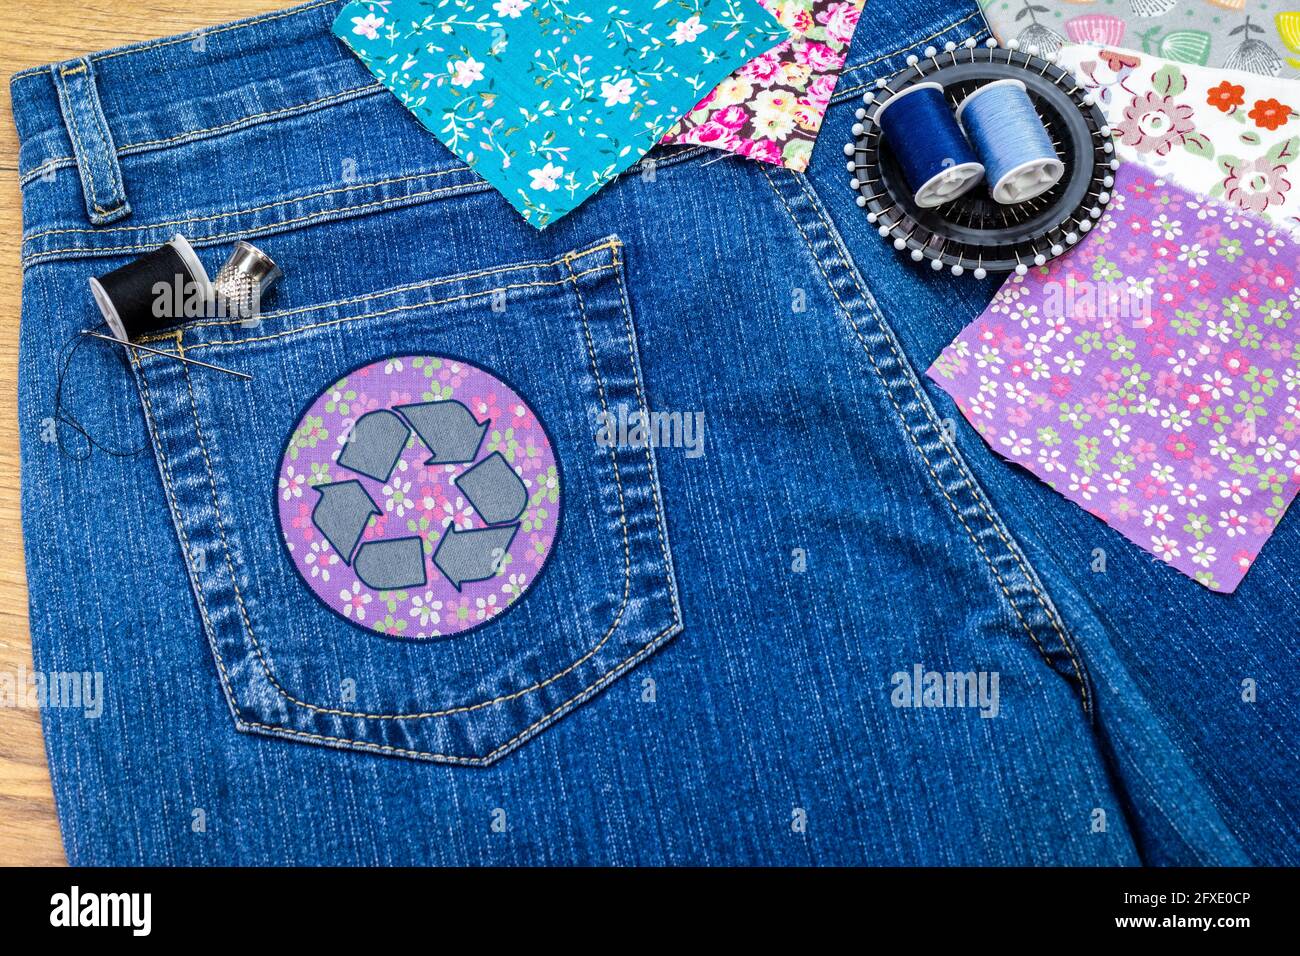 Recycle clothes icon patch on jeans, sustainable fashion visible mending concept, repair, recycle, reuse clothes and textiles to reduce waste Stock Photo